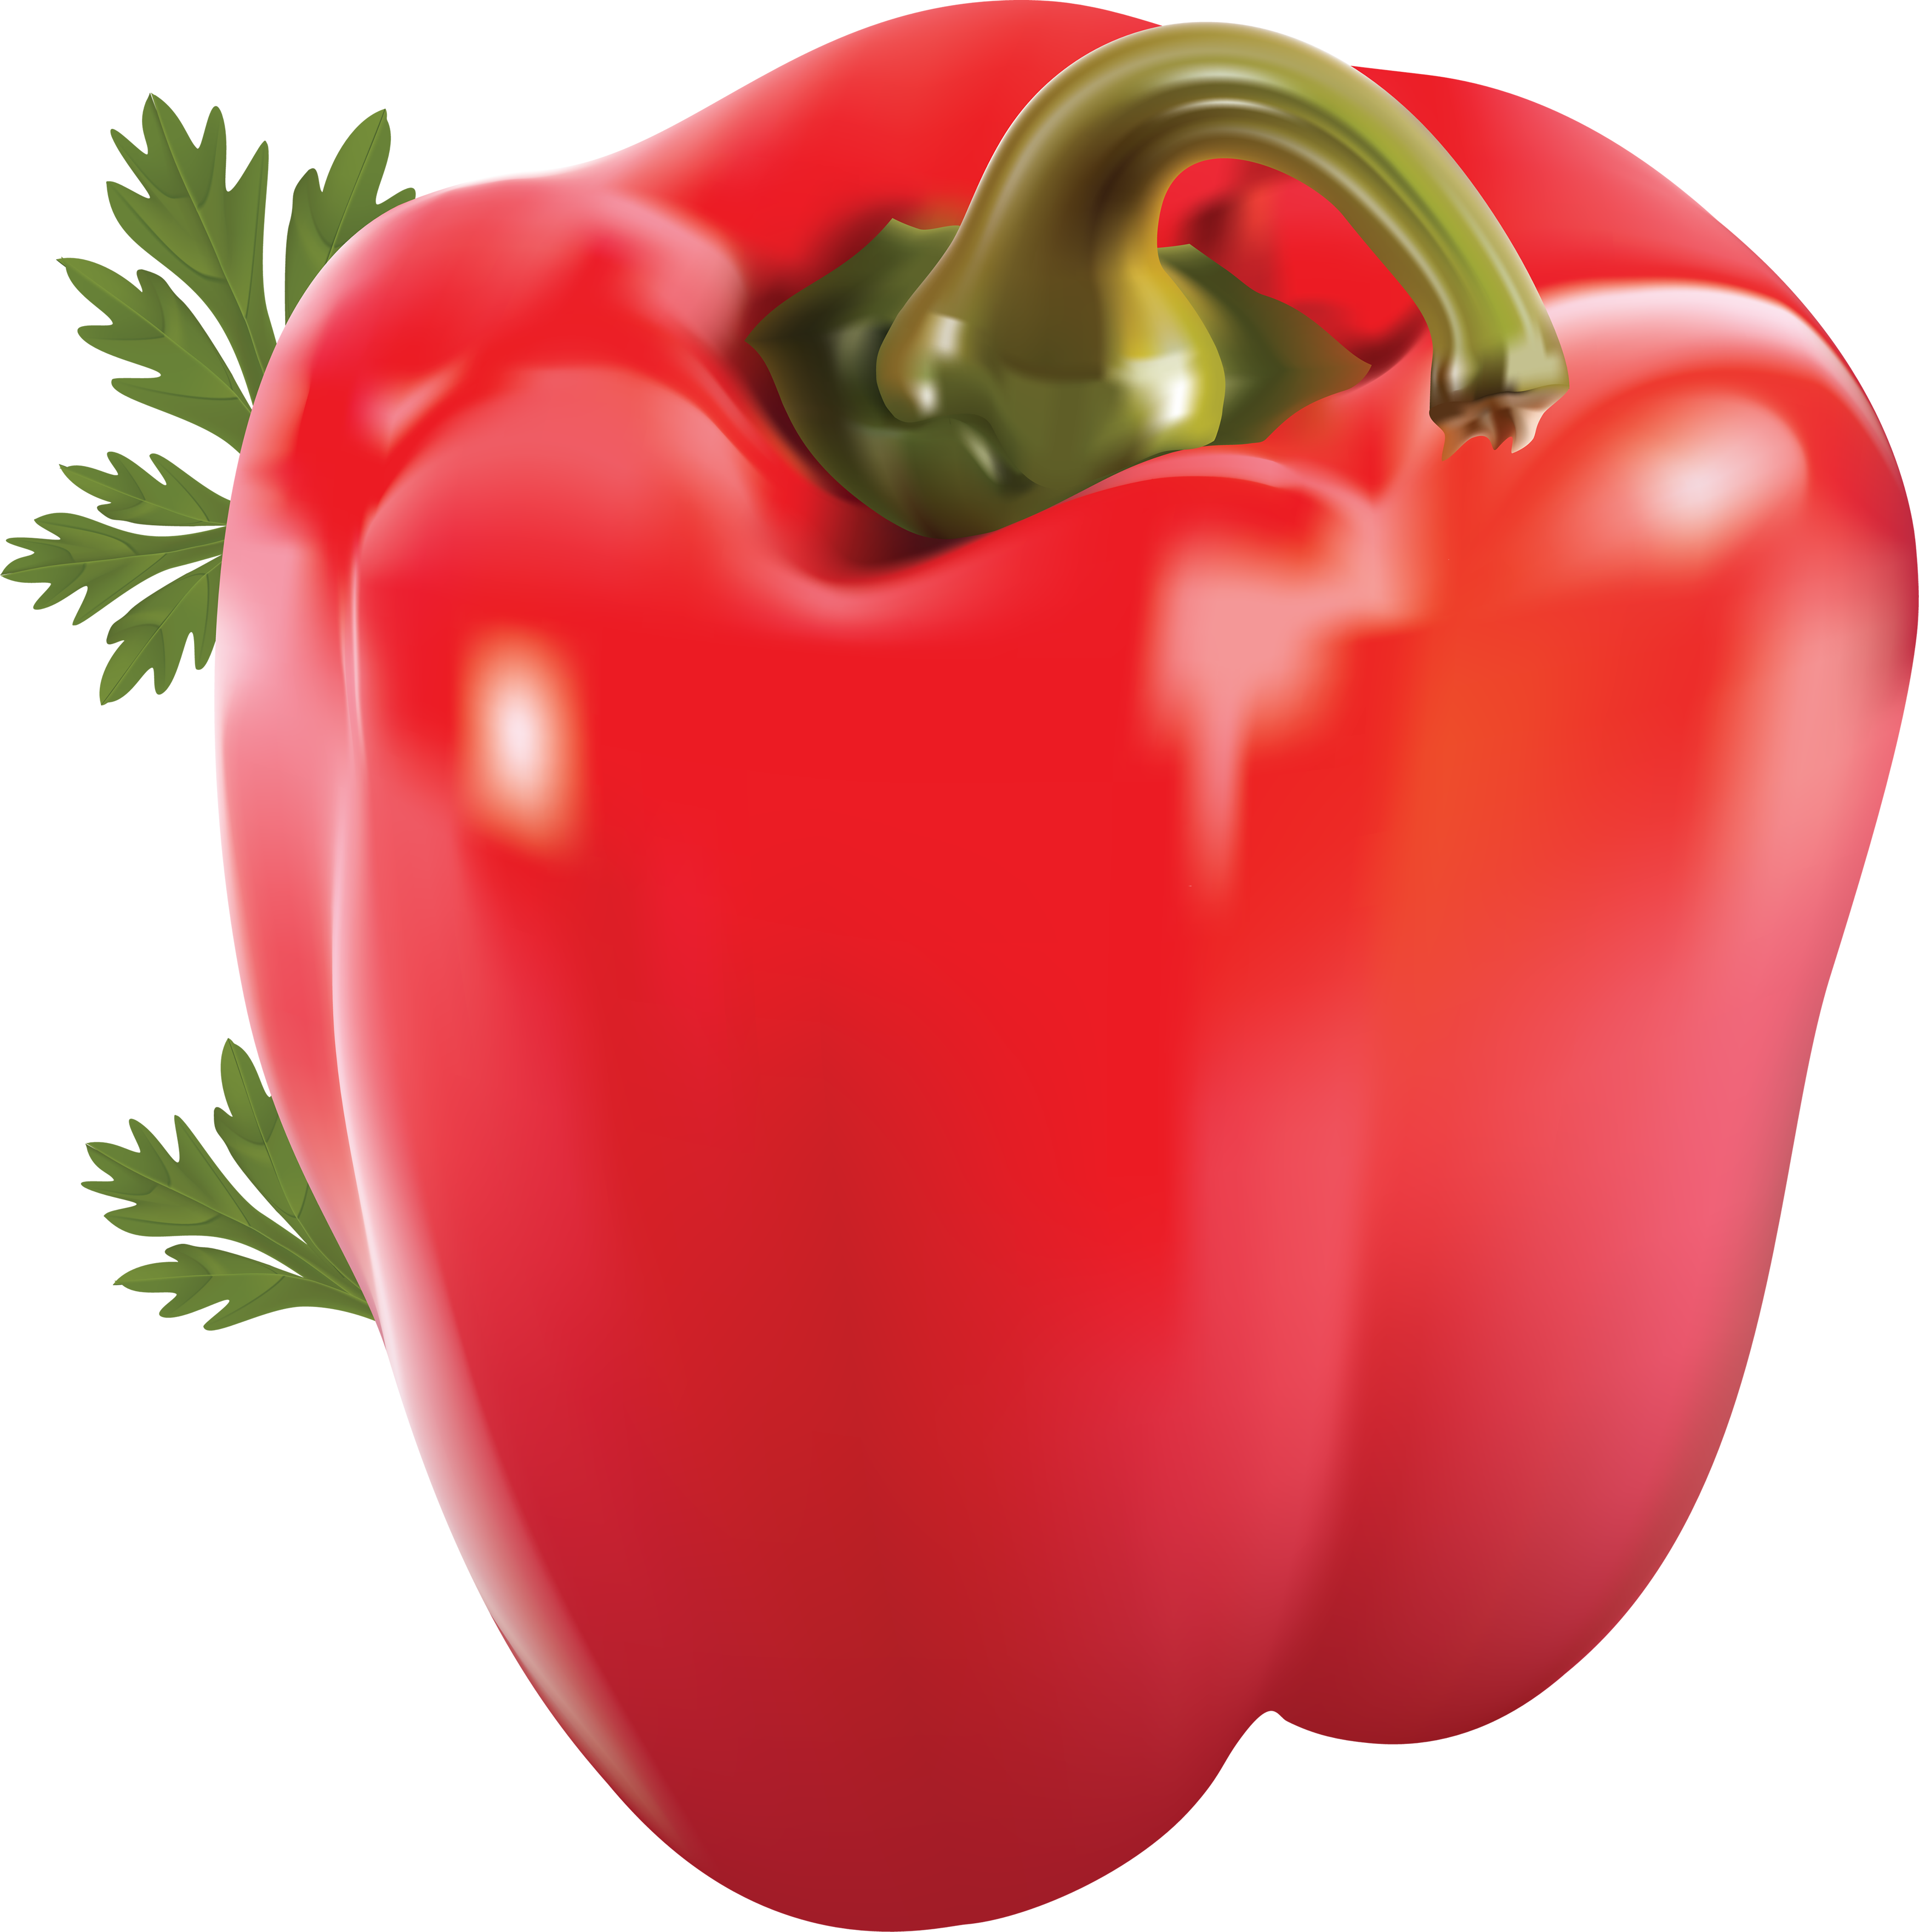 Pepper clipart sweet pepper. Red png image purepng